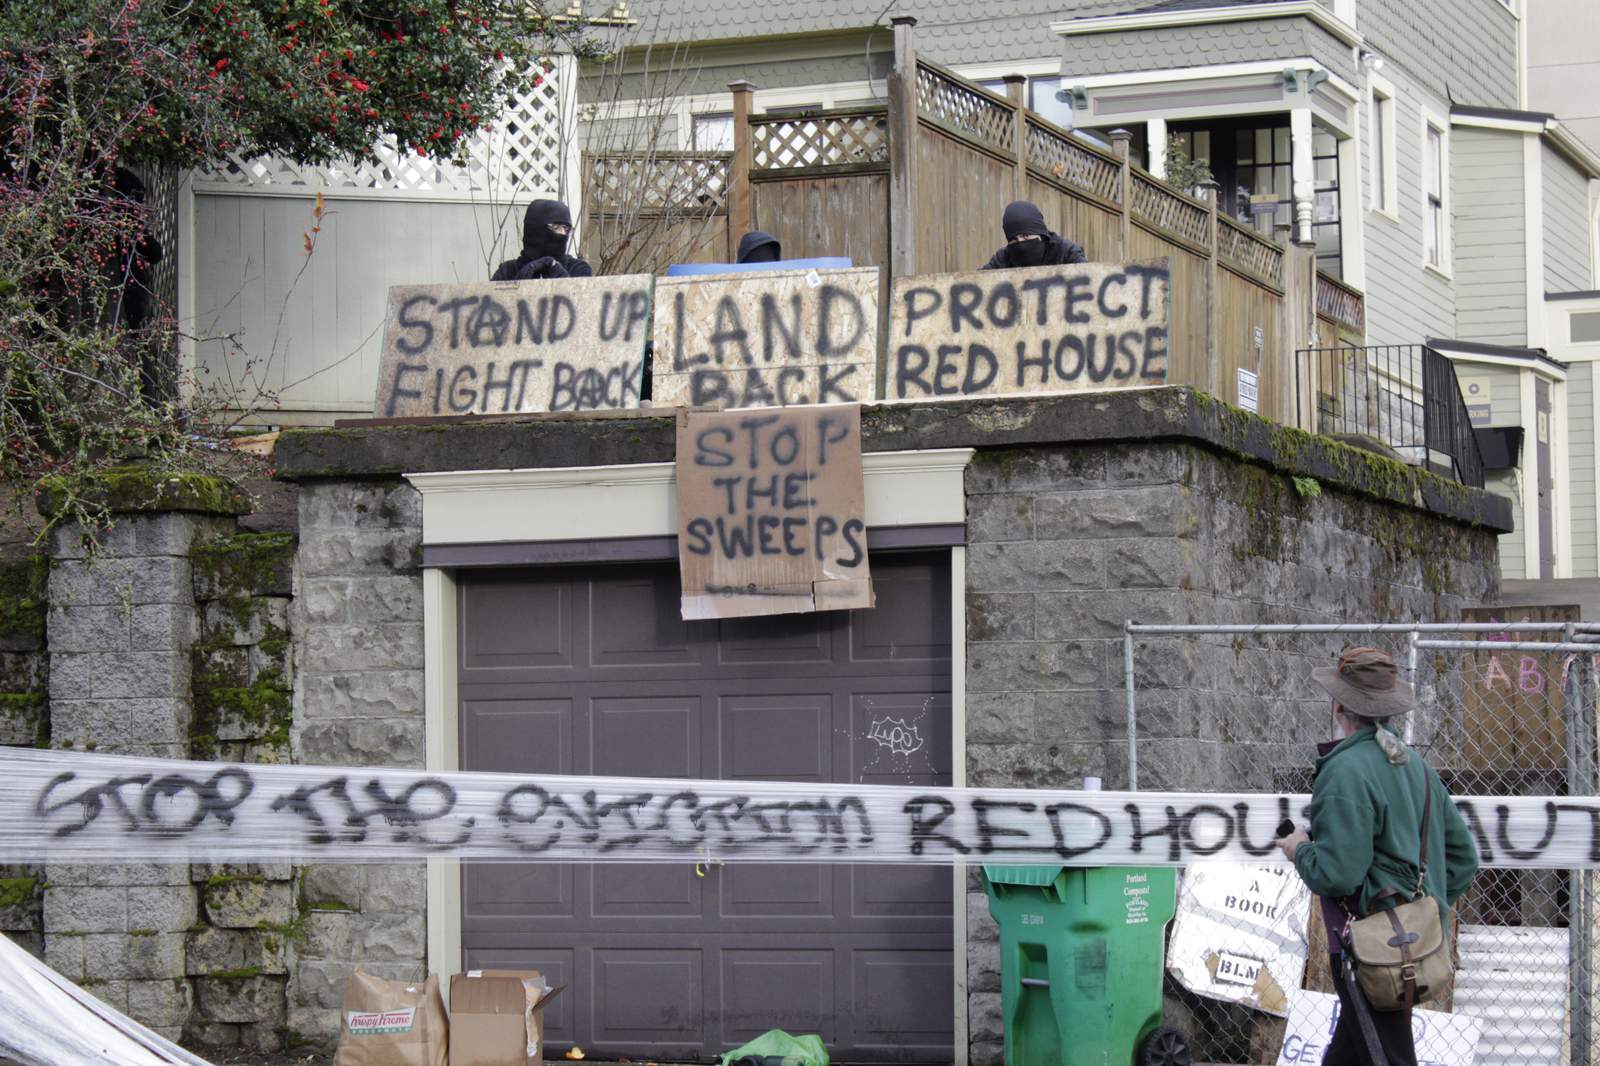 Investor in Portland eviction protest says he'd sell home